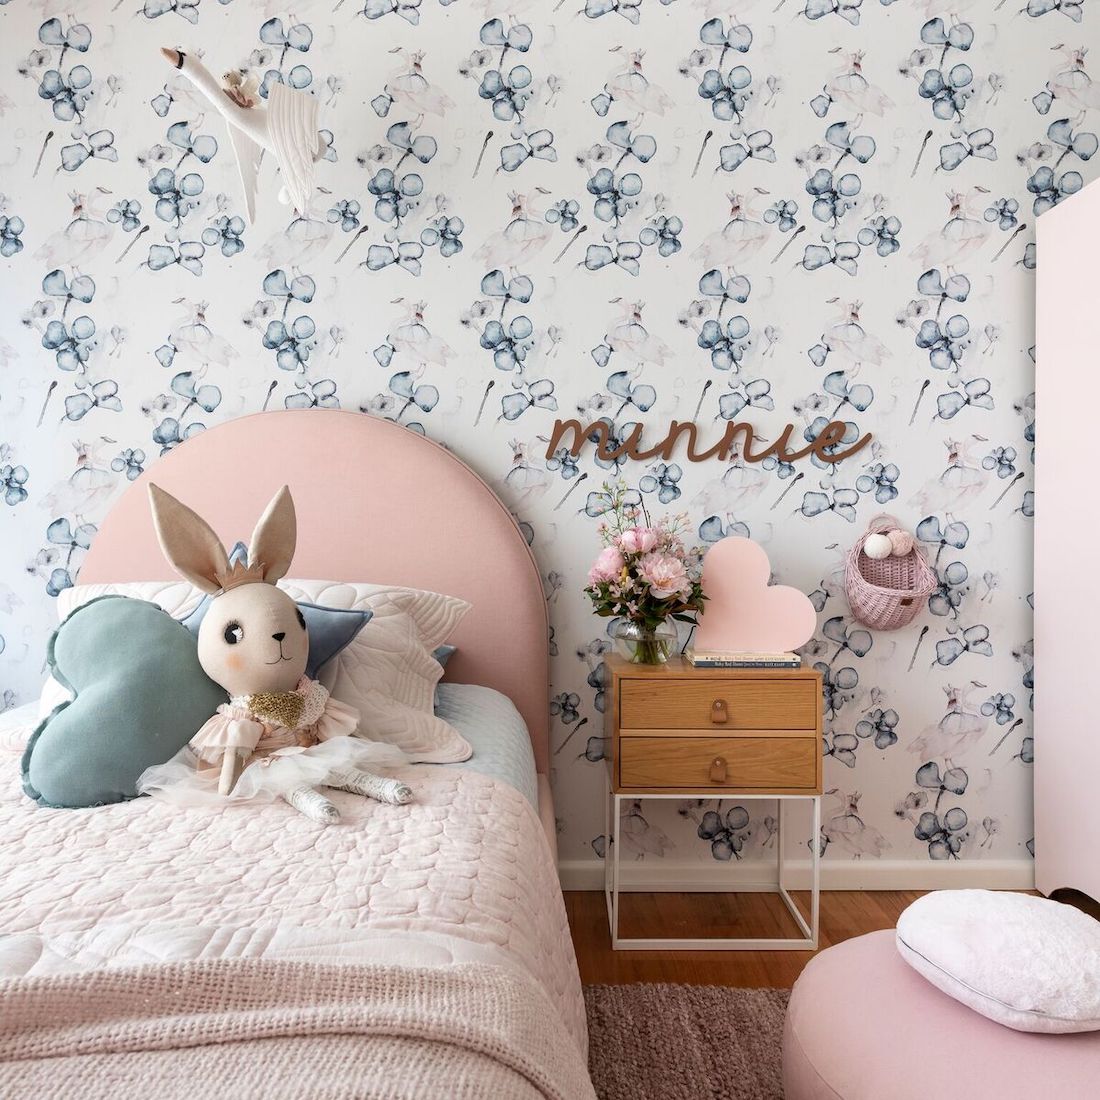 Minnie pink and blue girl's room bedhead